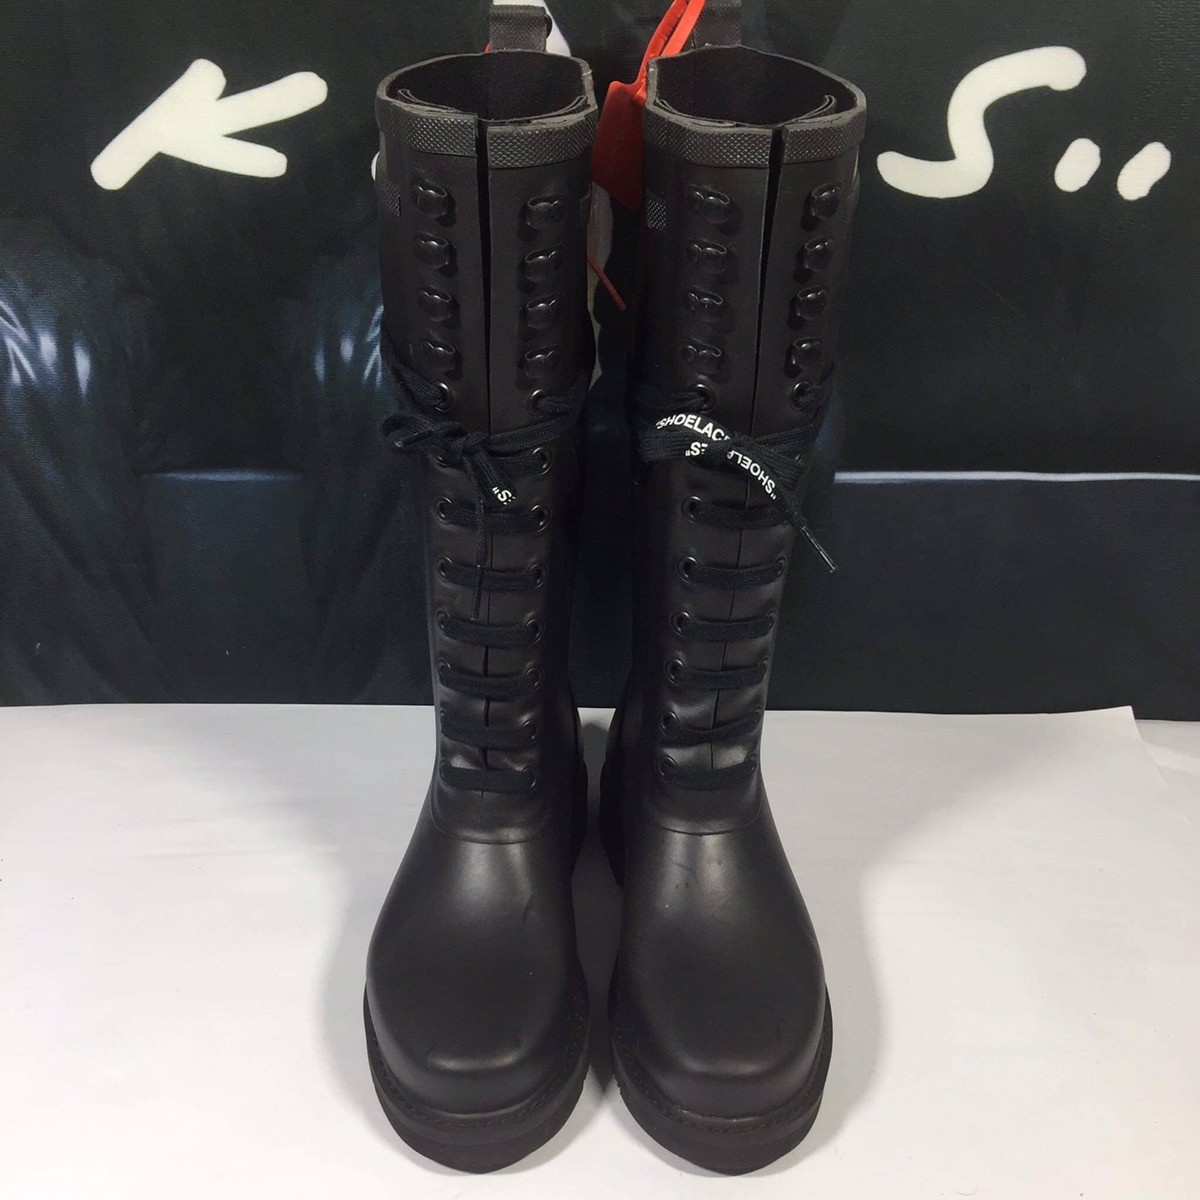 “For Riding “ Black Rubber Boots - 3